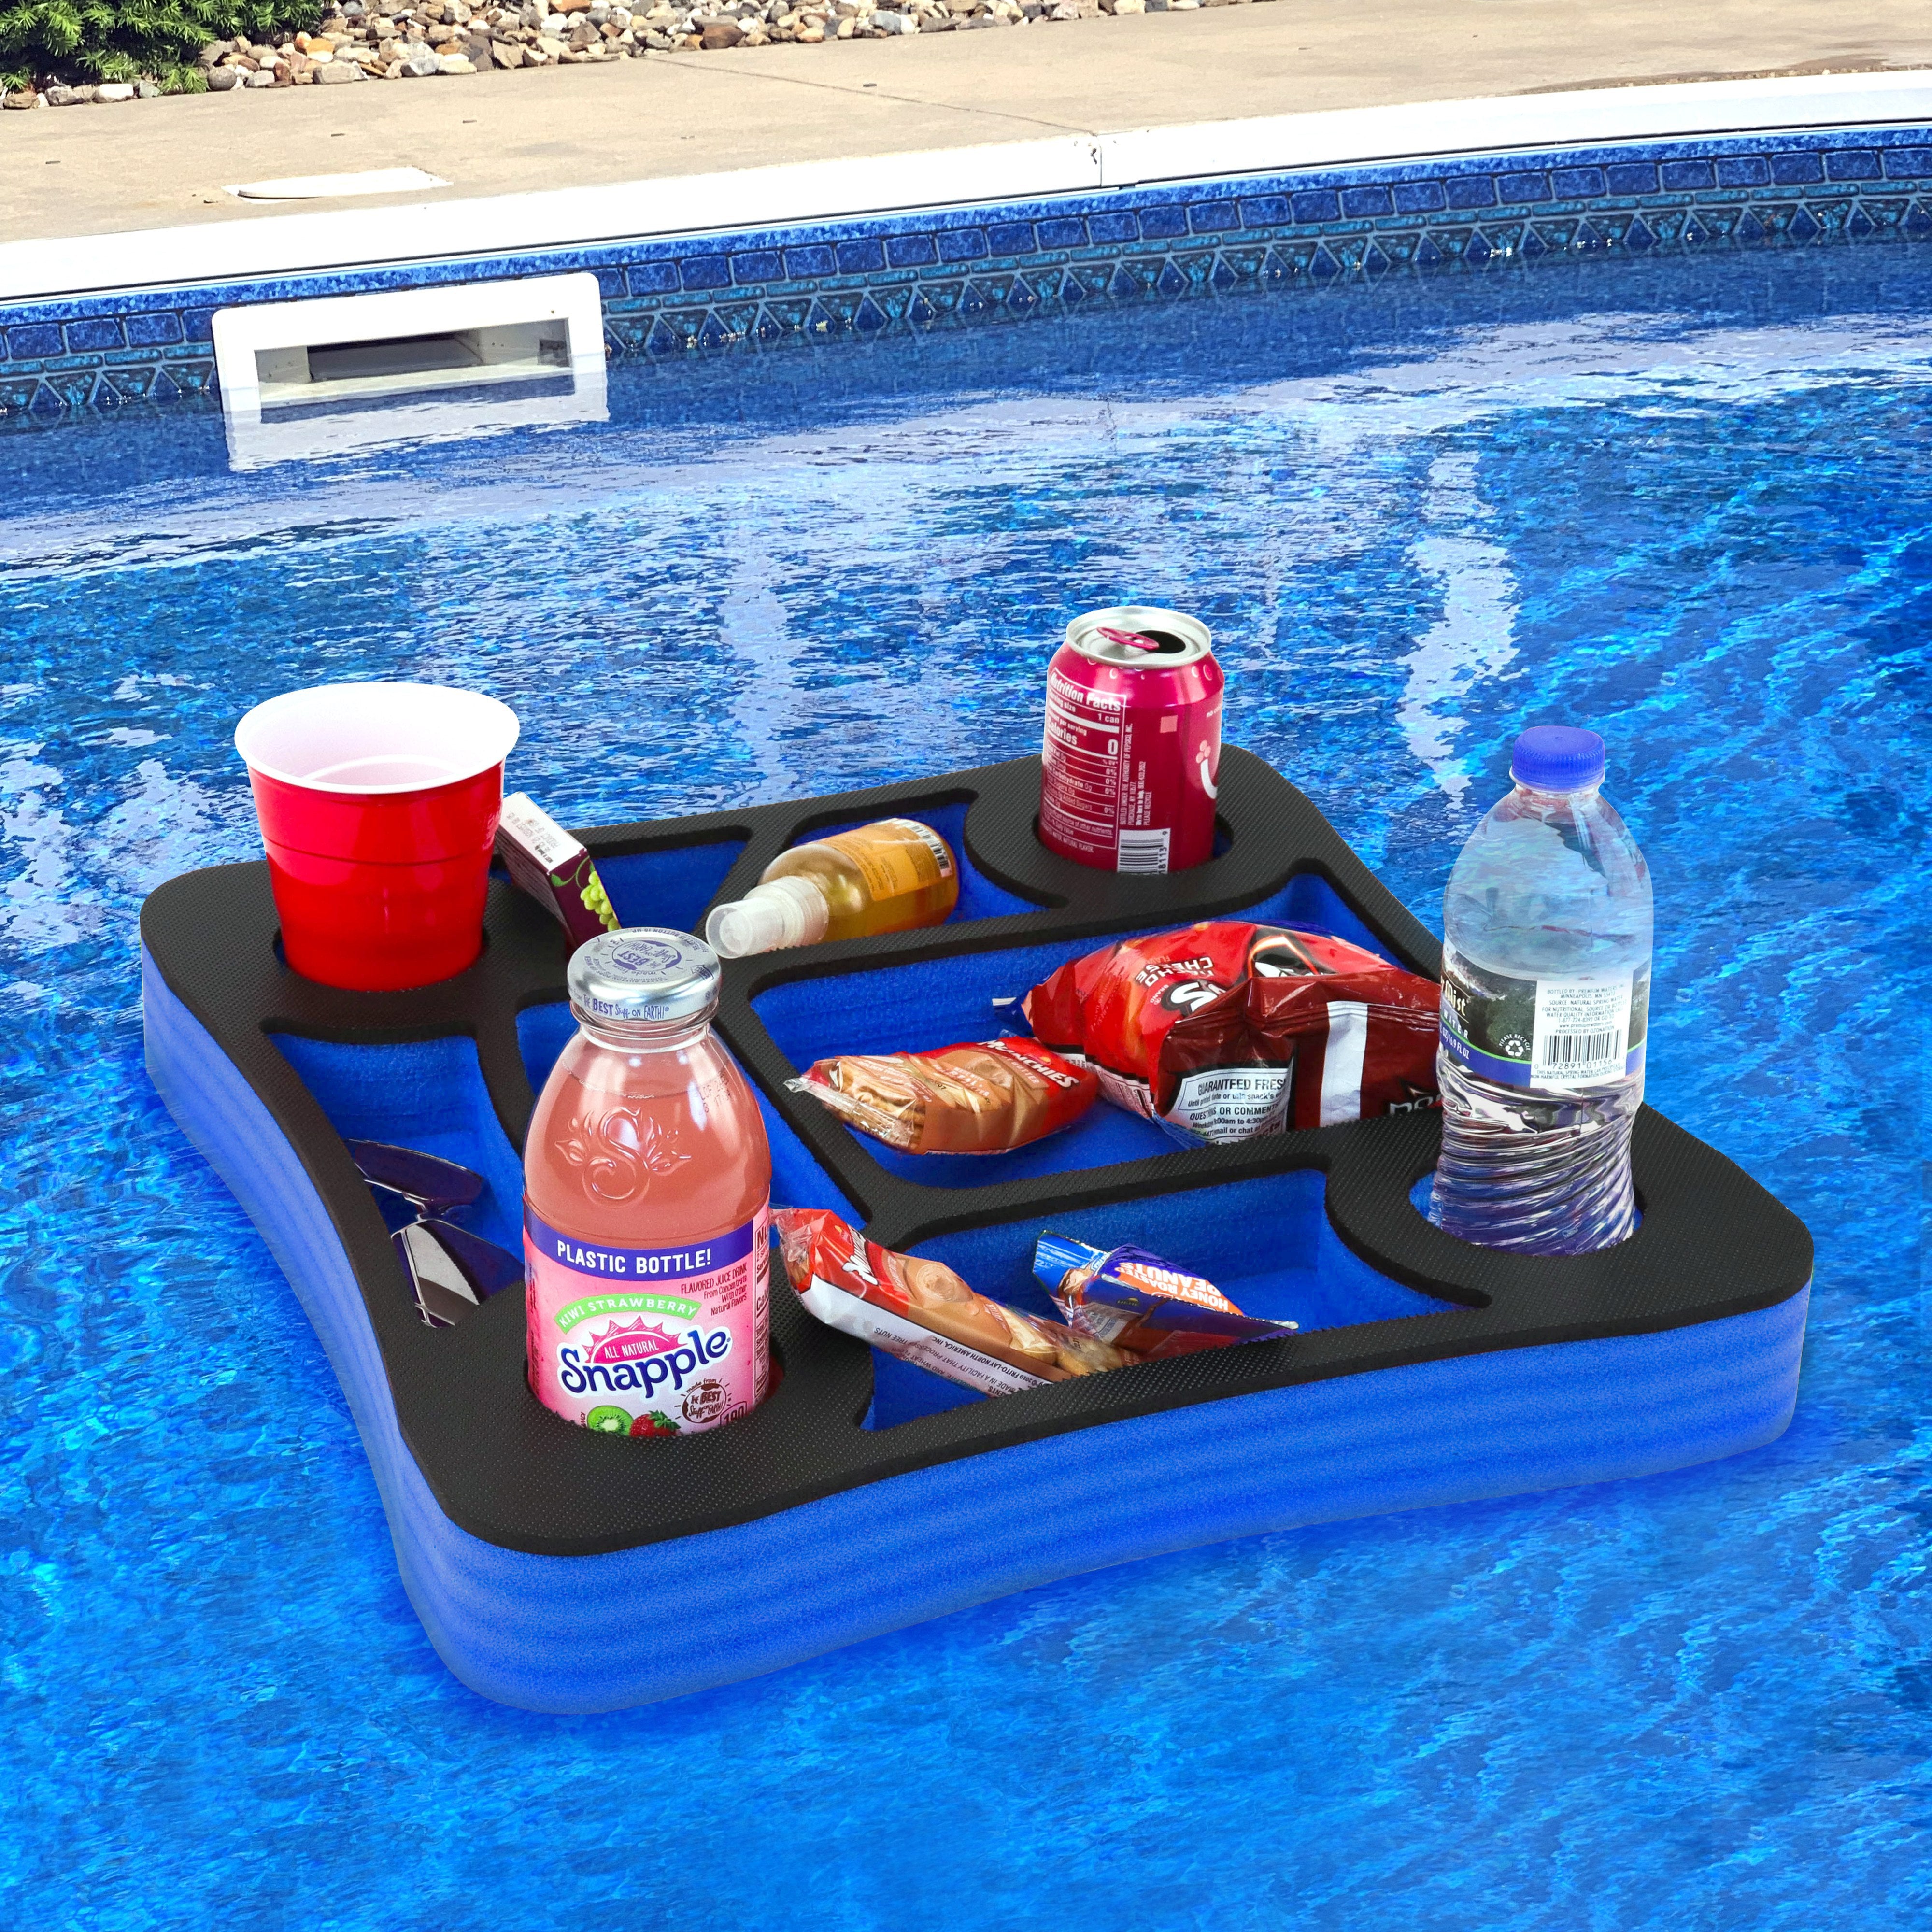 RAMIEYOO Floating Drink Holder,Refreshment Table Tray for Pool Beach Party  or Hot Tub Float Loung-Versatile & Portable Serving Bar